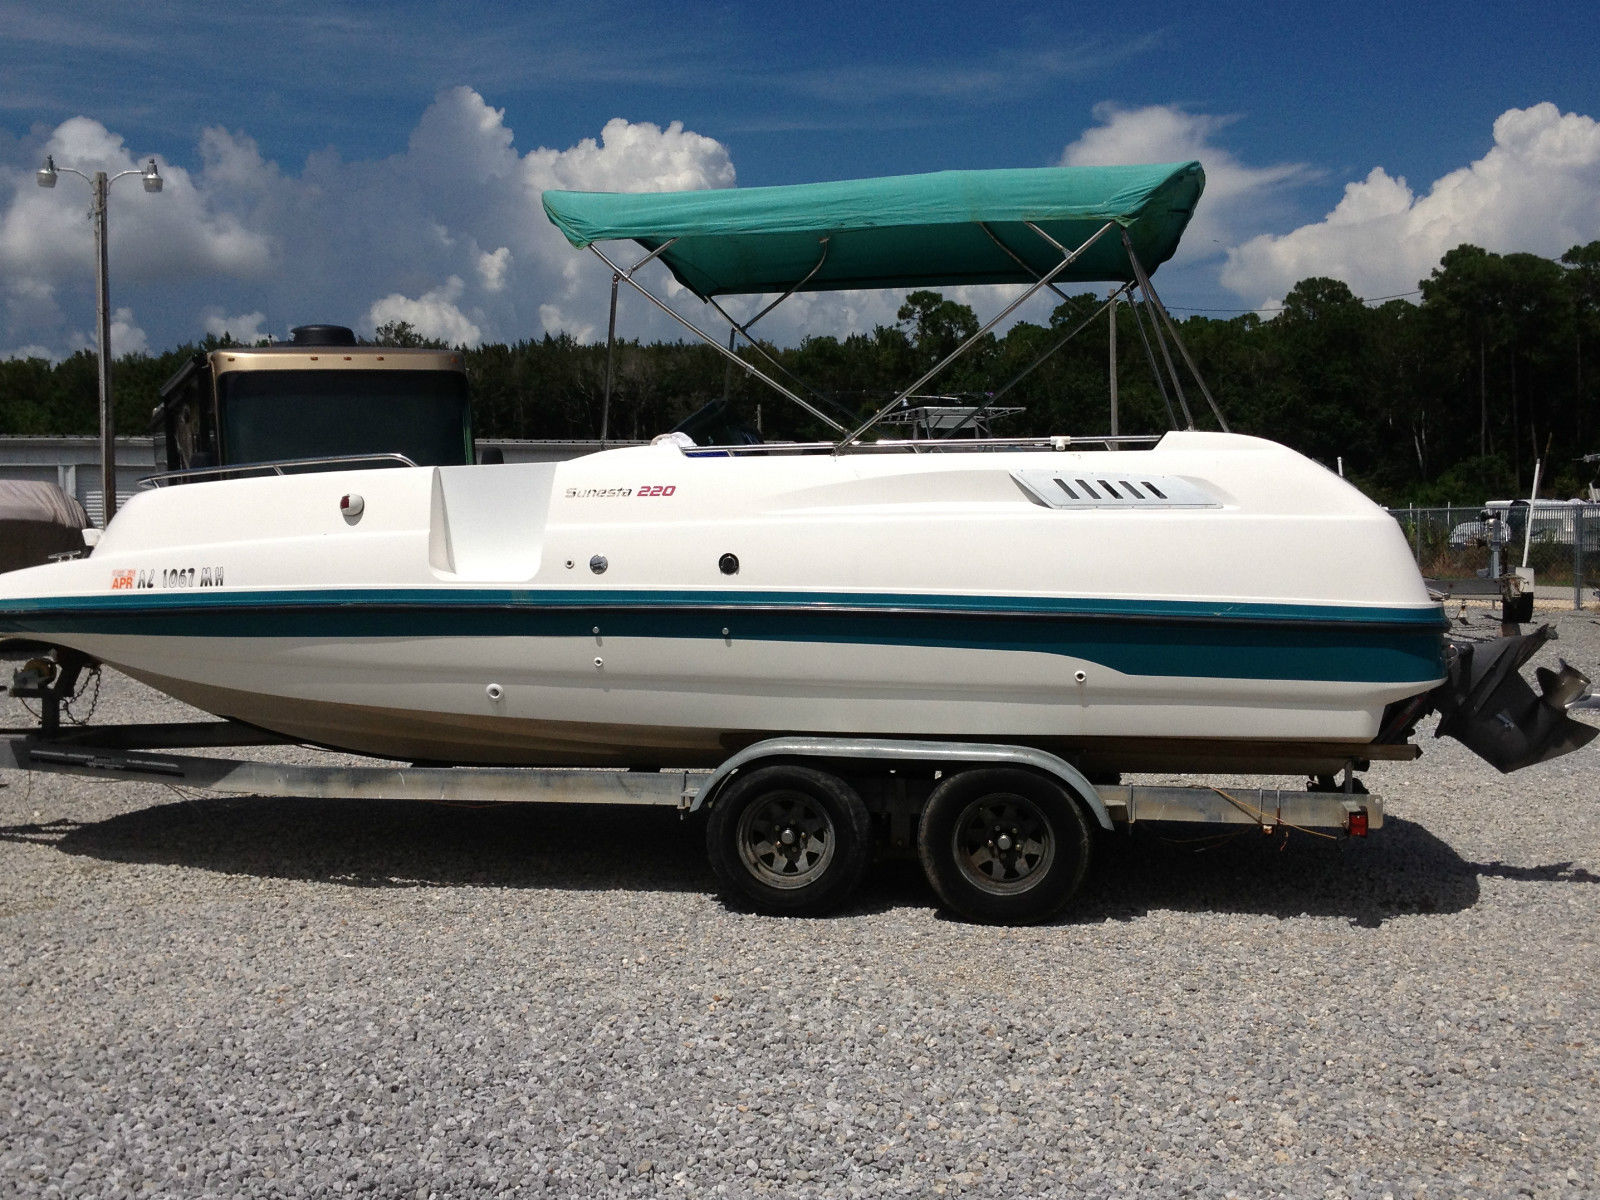 Chaparral Sunesta 225 1992 for sale for $6,000 - Boats 